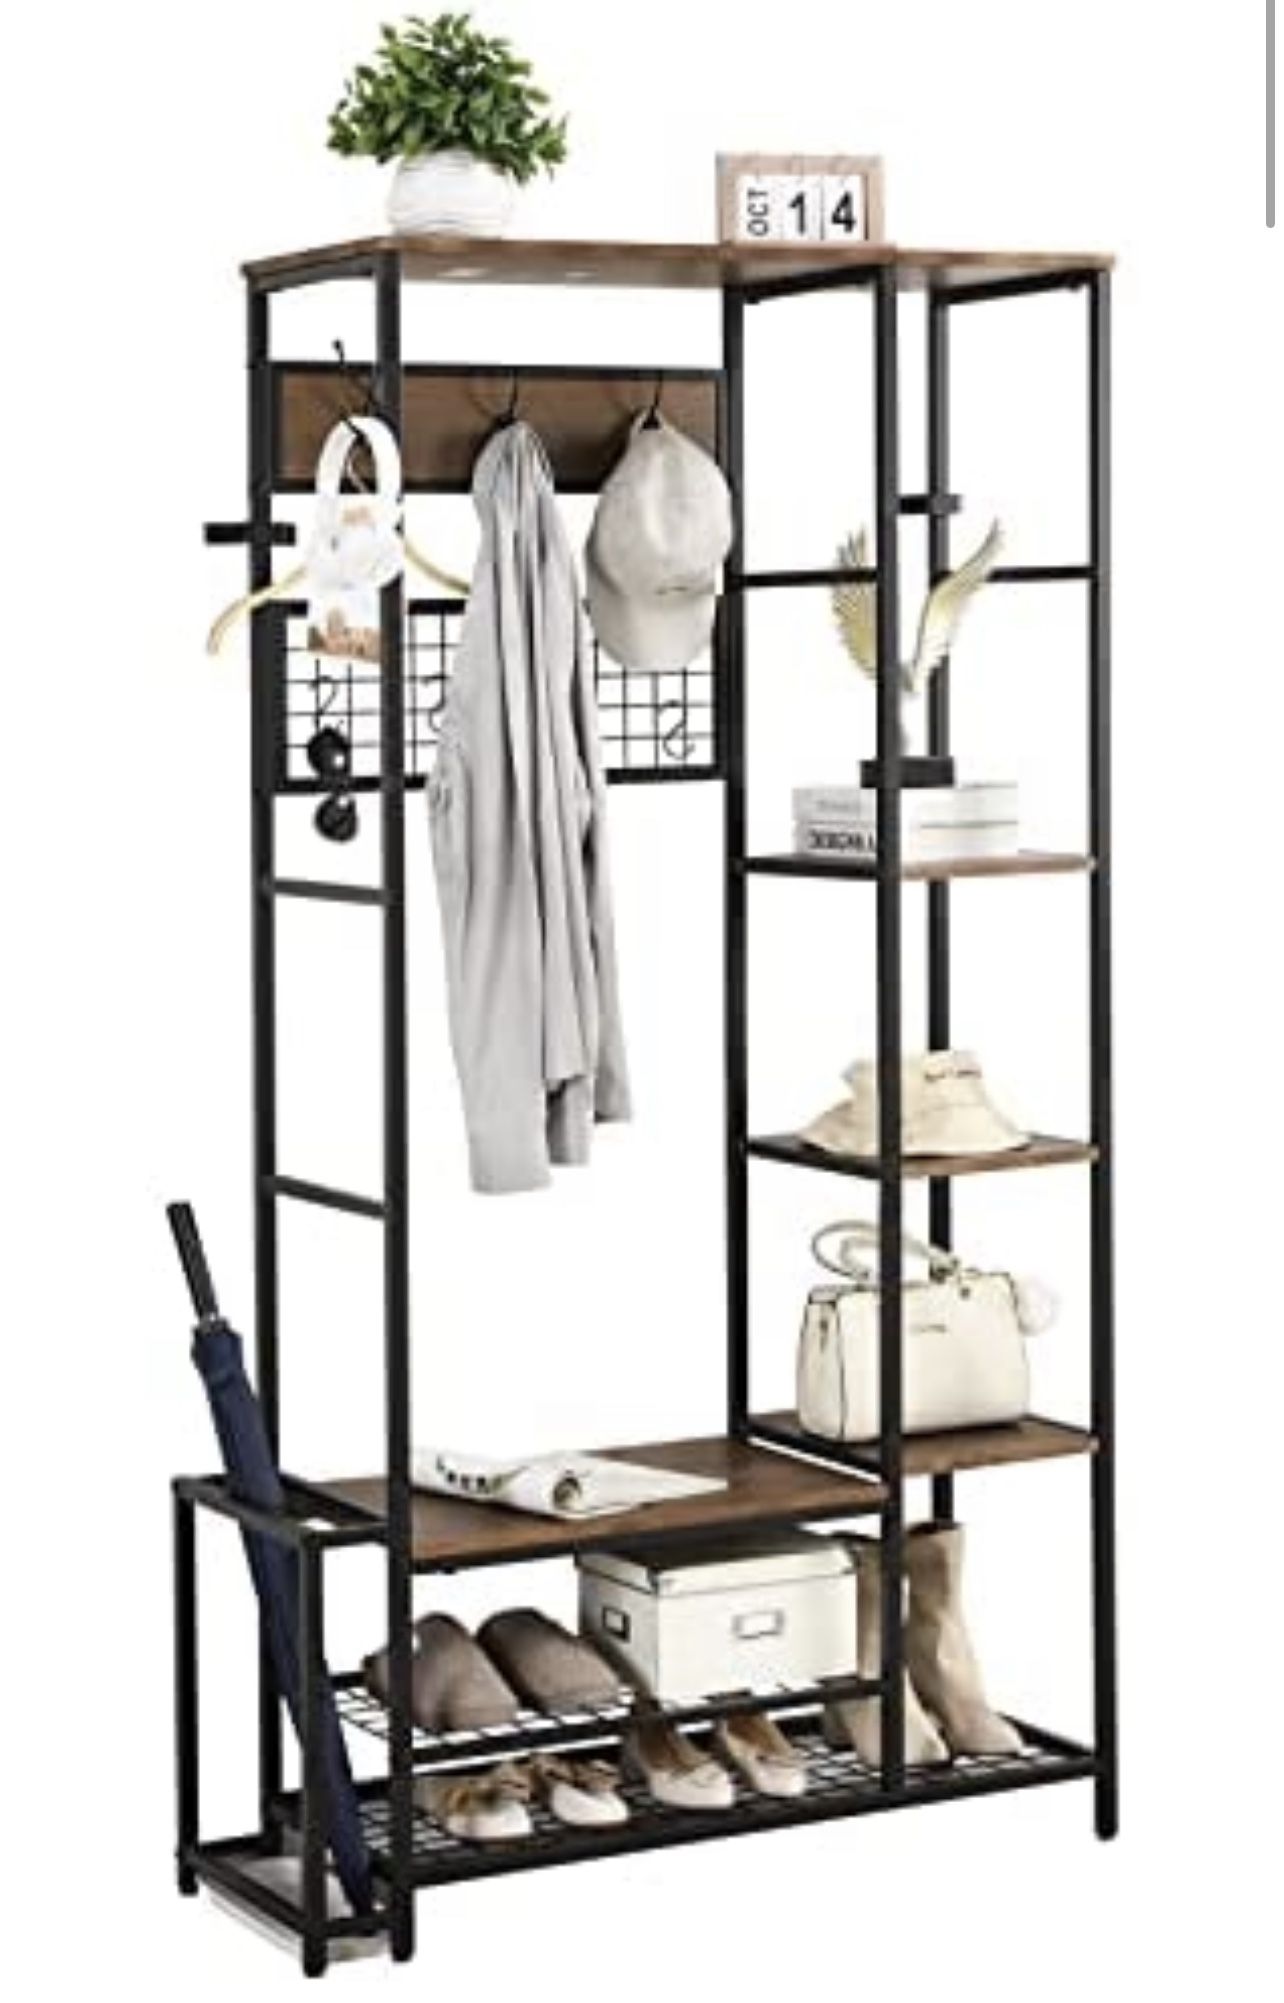 (brand new) OIOG Entryway Hall Tree Shoe Bench, Coat Rack with Storage Shelves and Hooks, Industrial Mudroom Storage Organizer for Home (Rustic Brown,